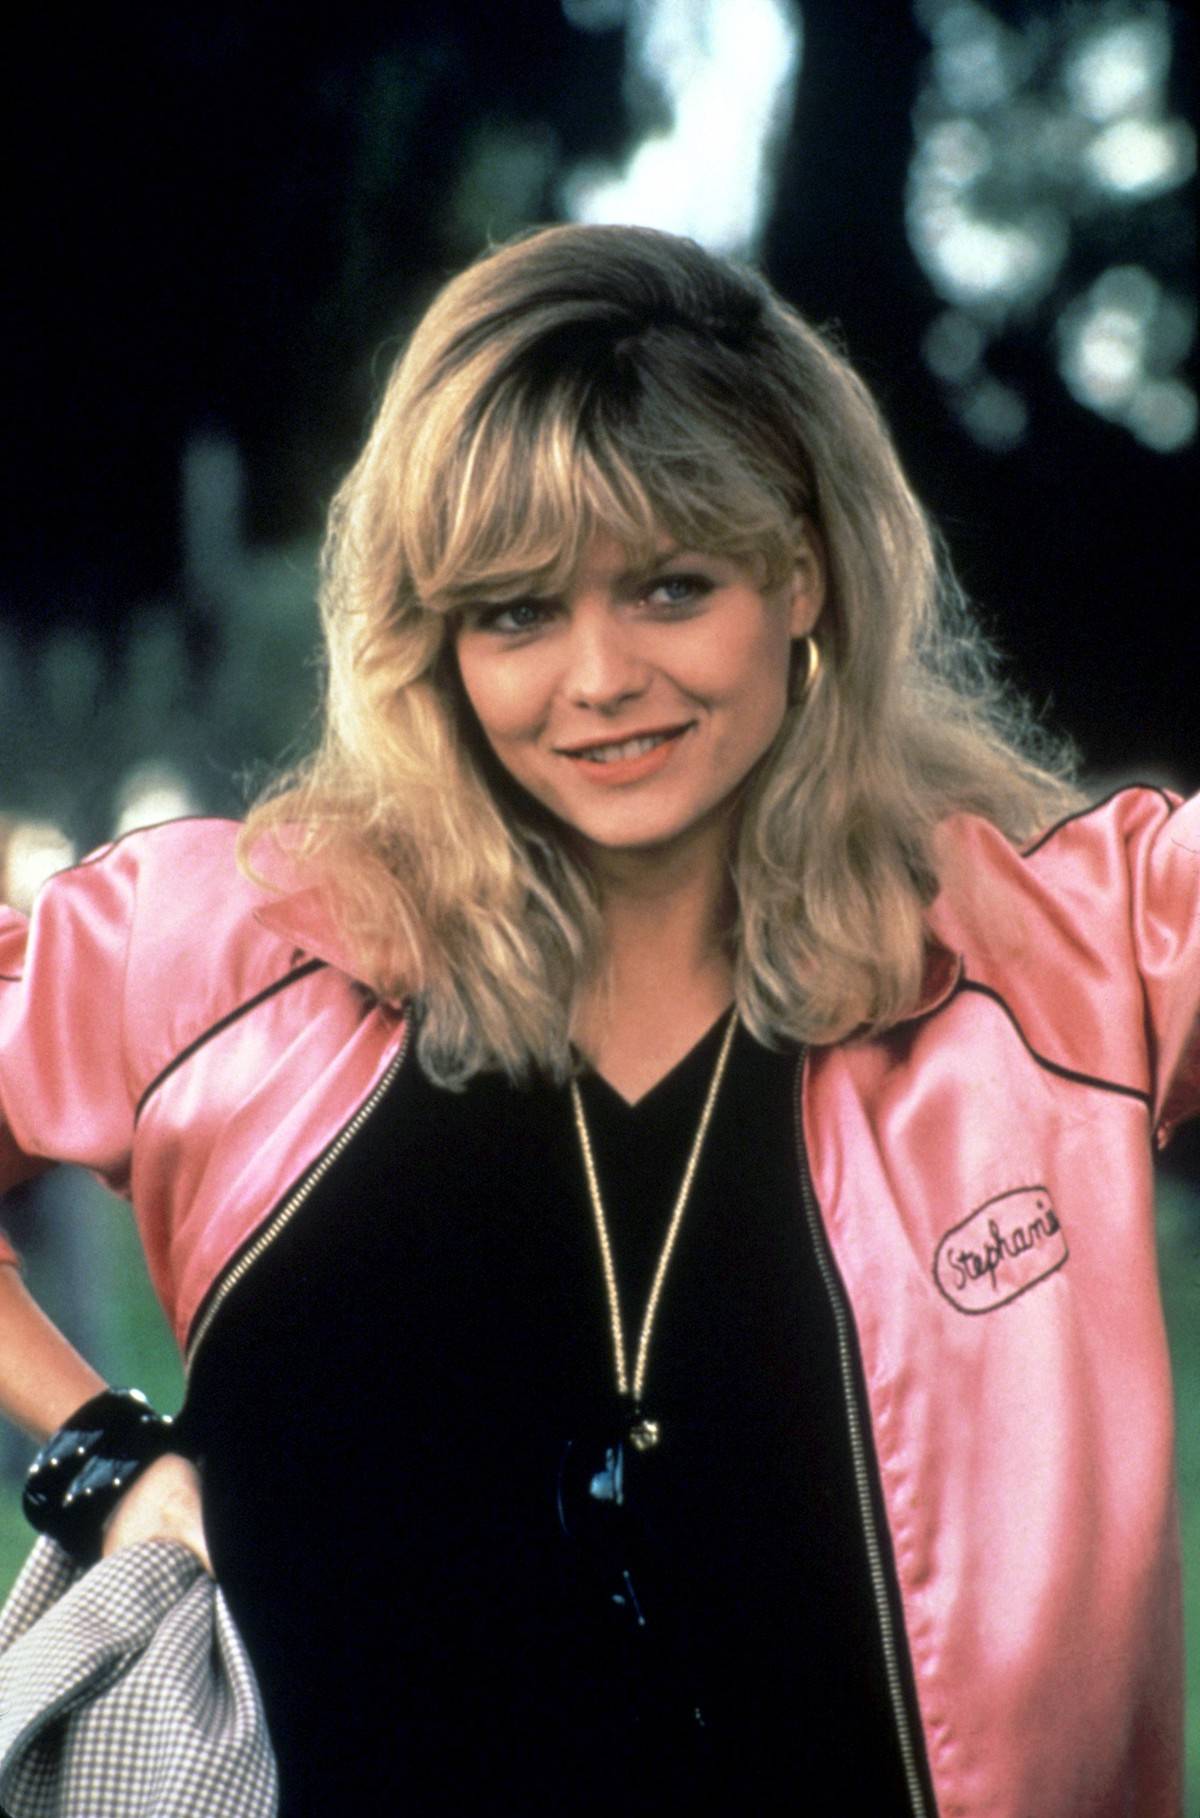 Michelle Pfeiffer, “Grease 2” (Fot. East News)